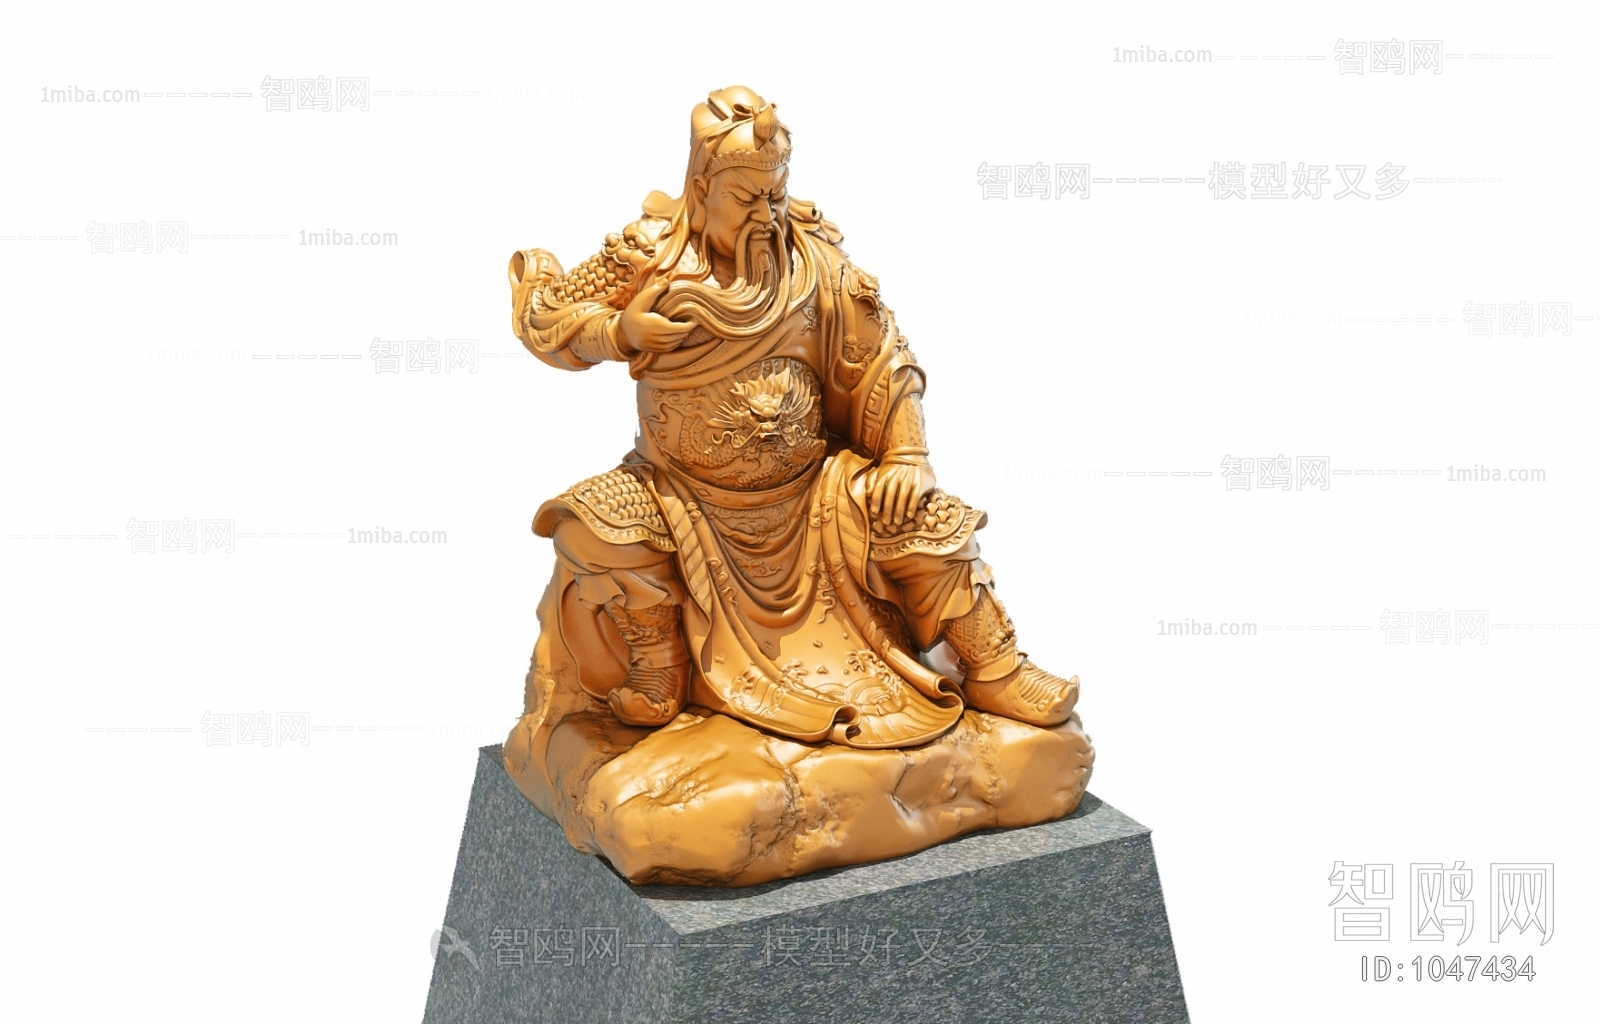 New Chinese Style Sculpture